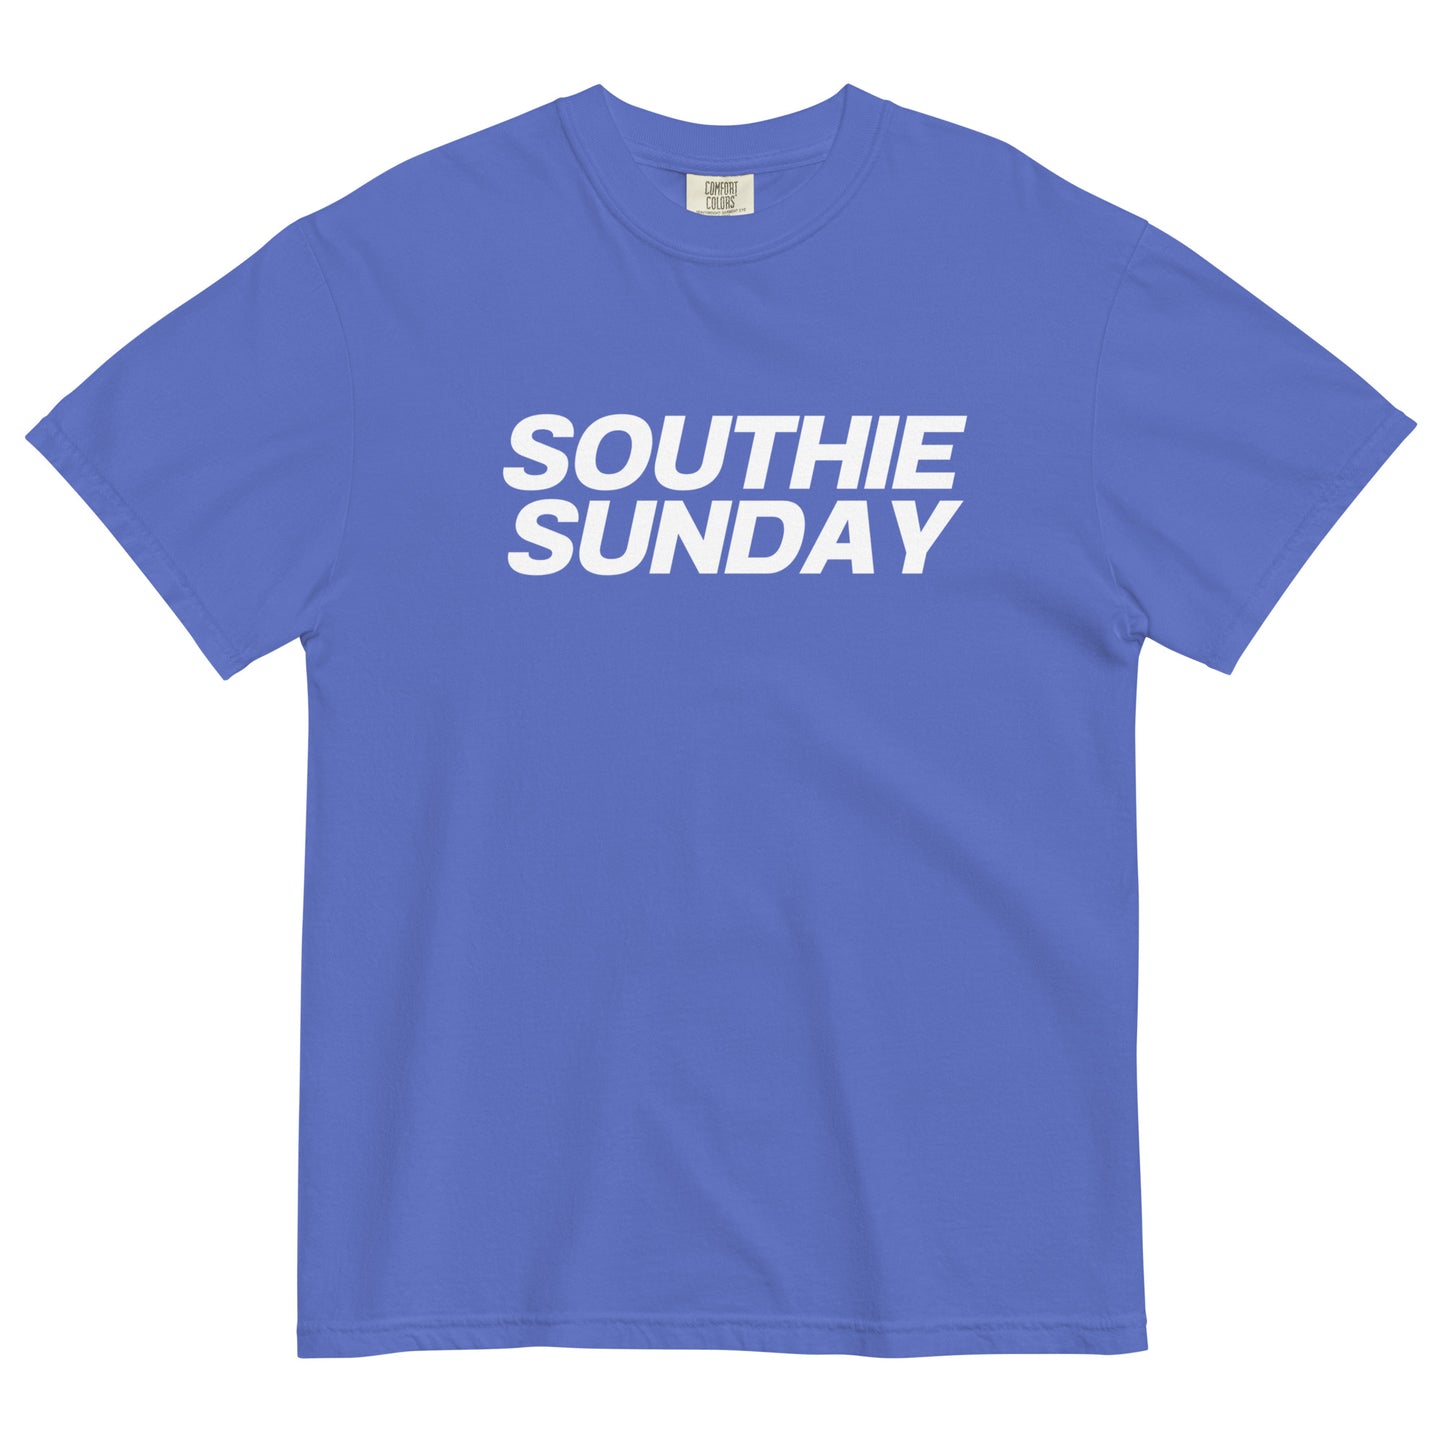 blue tshirt that says "southie sunday" in white lettering